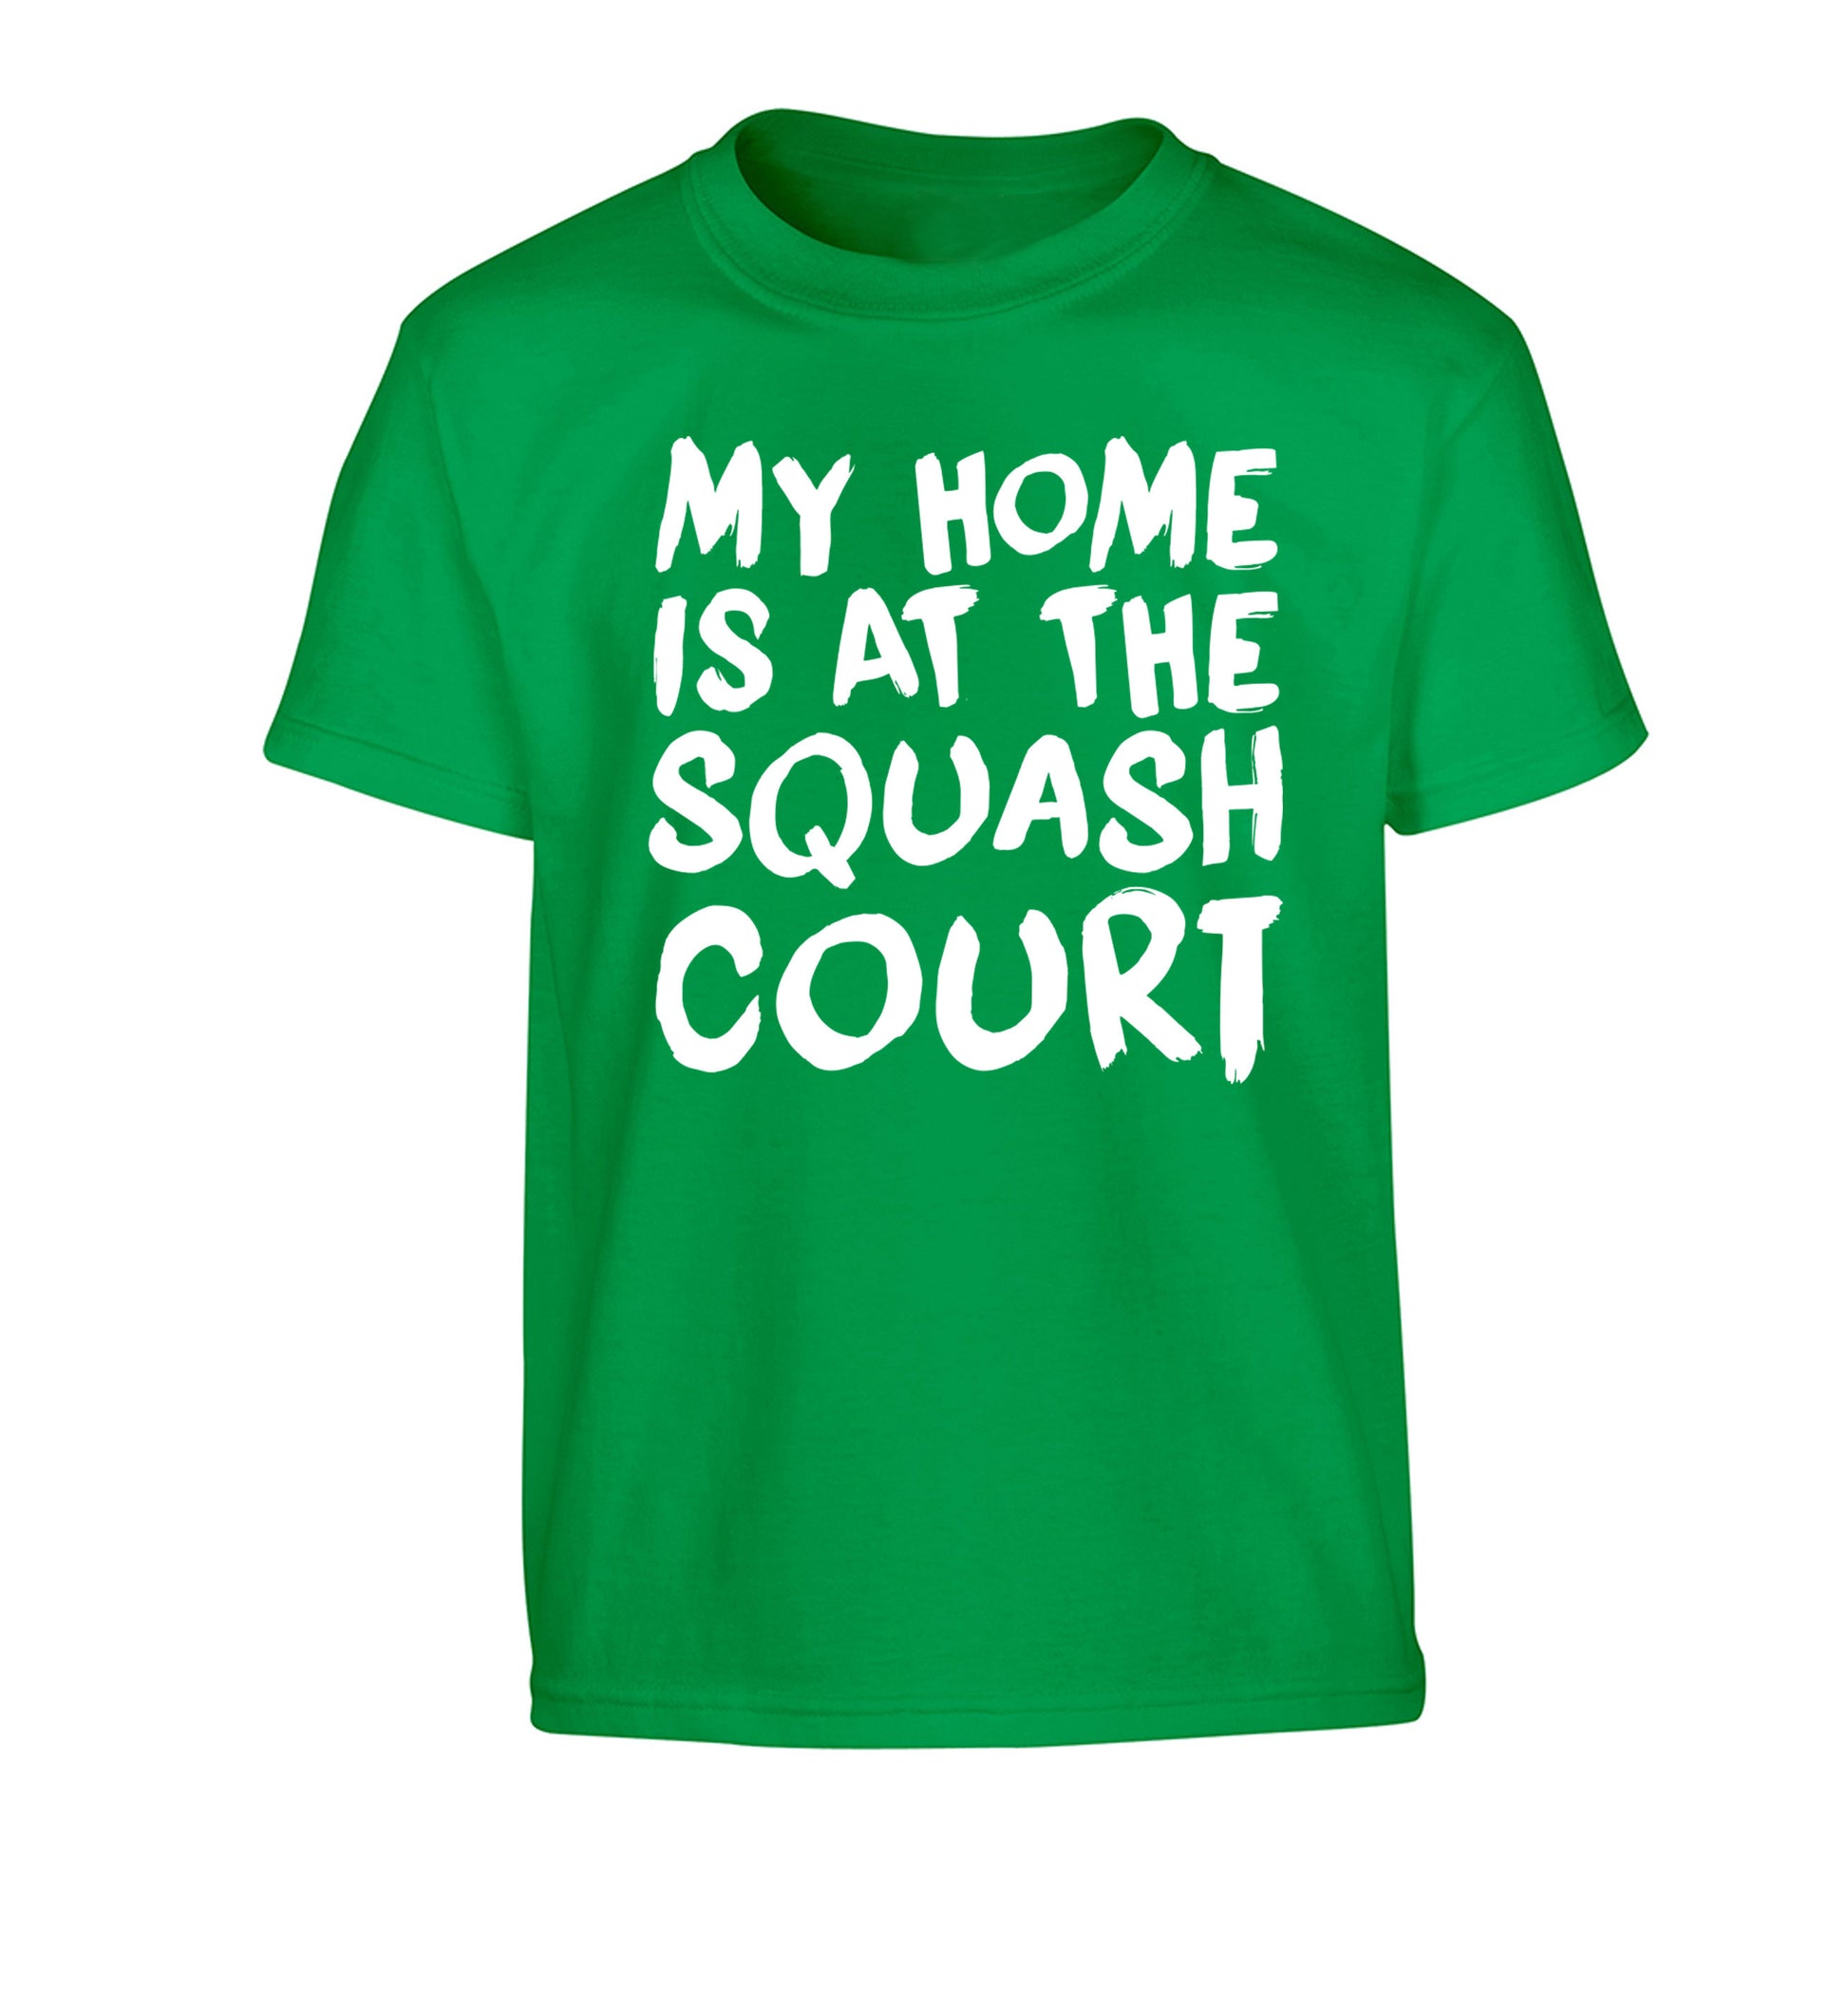 My home is at the squash court Children's green Tshirt 12-14 Years